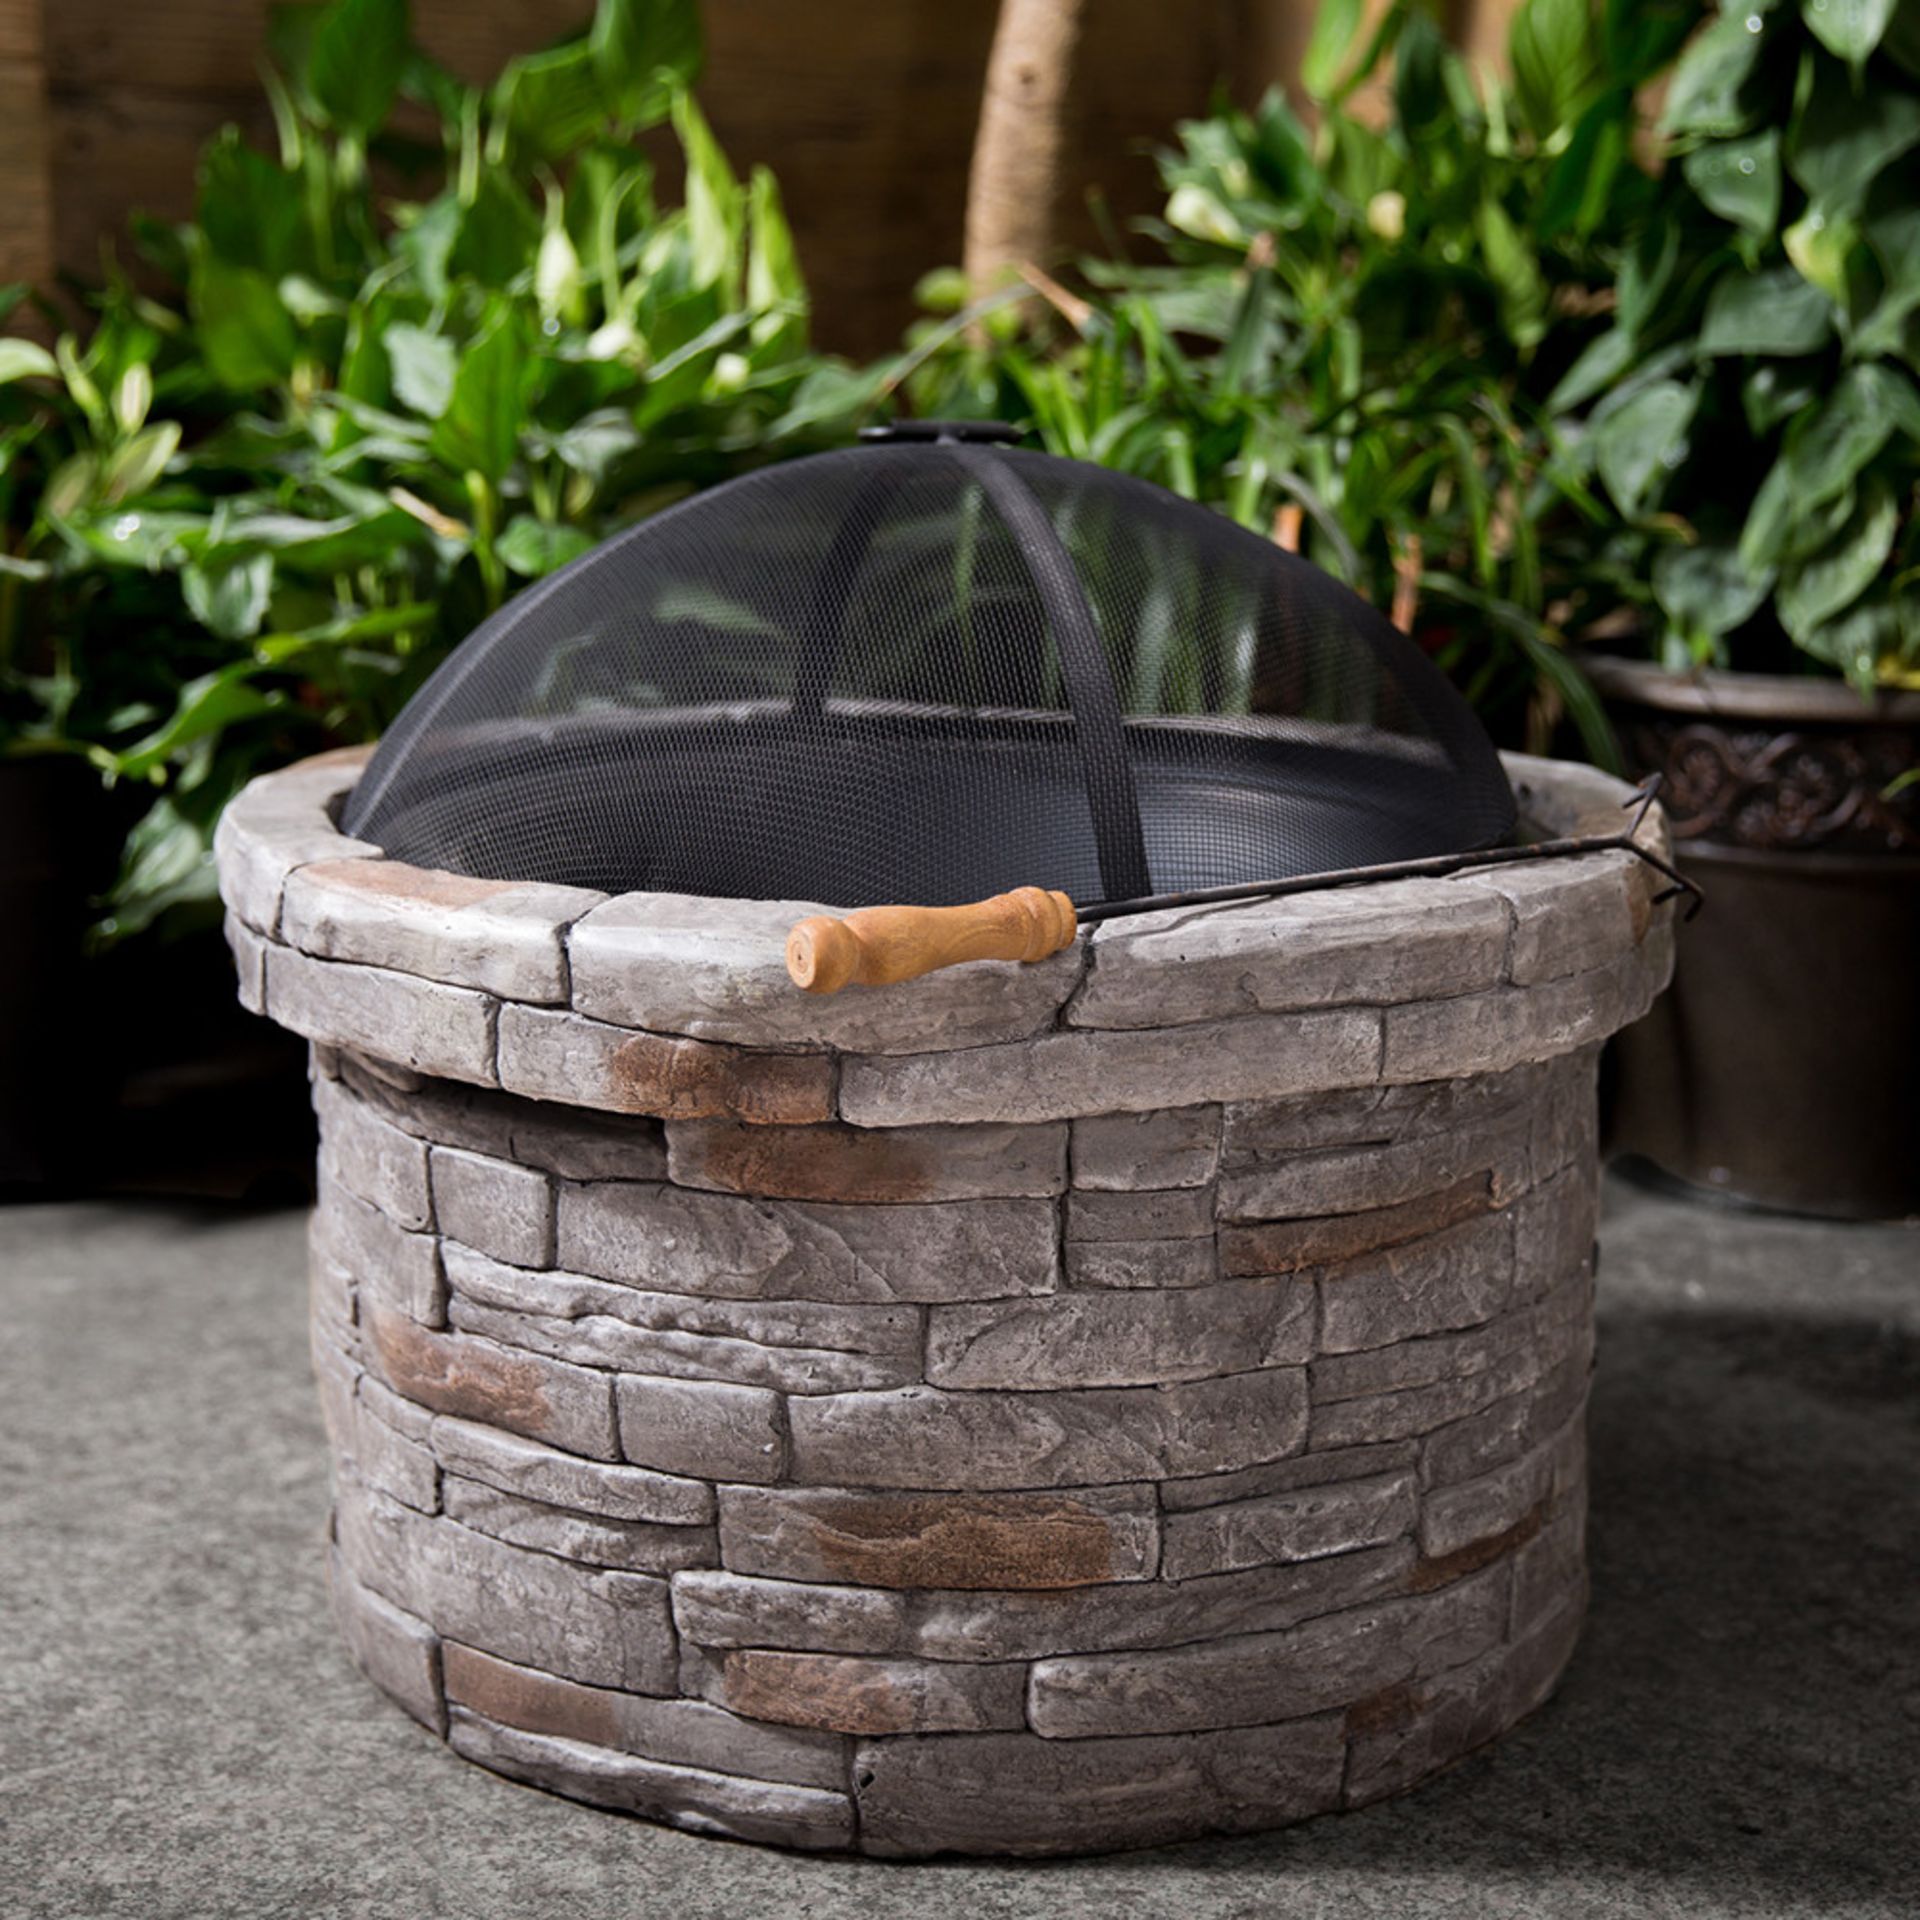 V Brand New Round Wood Burning Firepit 68 x 68 x 59 cm (WxDxH) Includes Fire Bowl, Base, Charcoal - Image 2 of 2